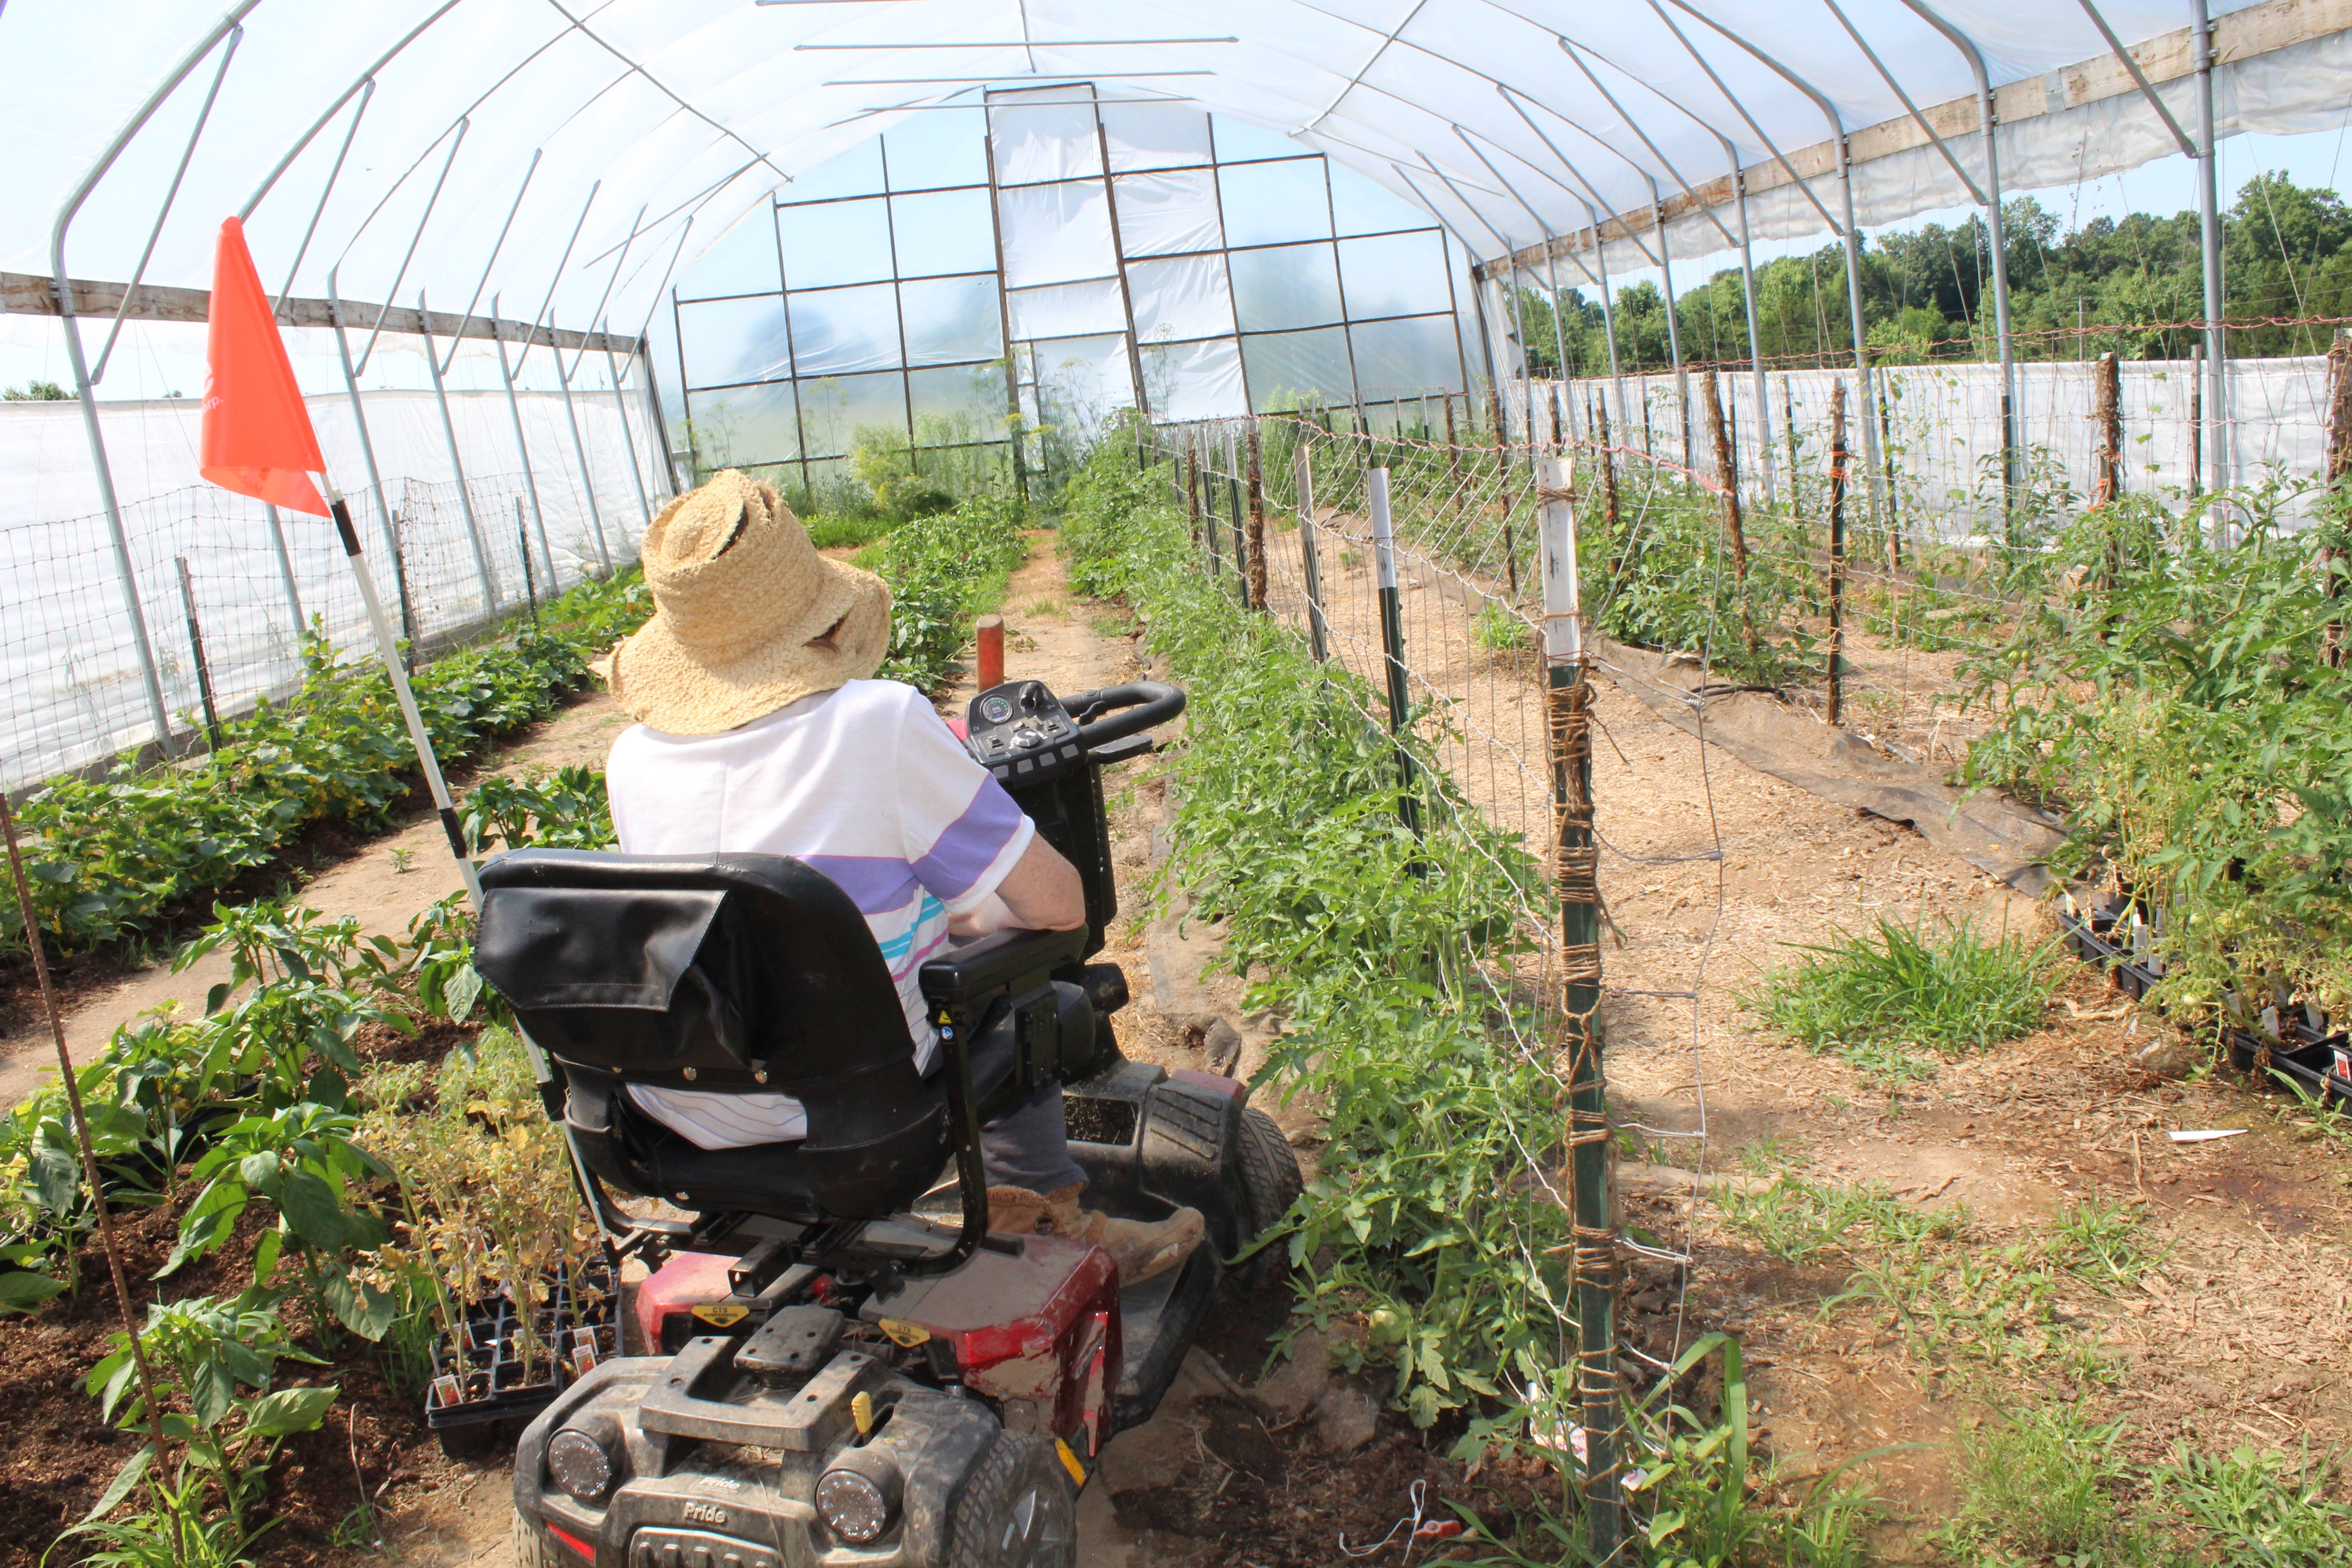 AgrAbility looks for ways to make travel through Kim DaWaulter's greenhouse and around the farm easier for her.